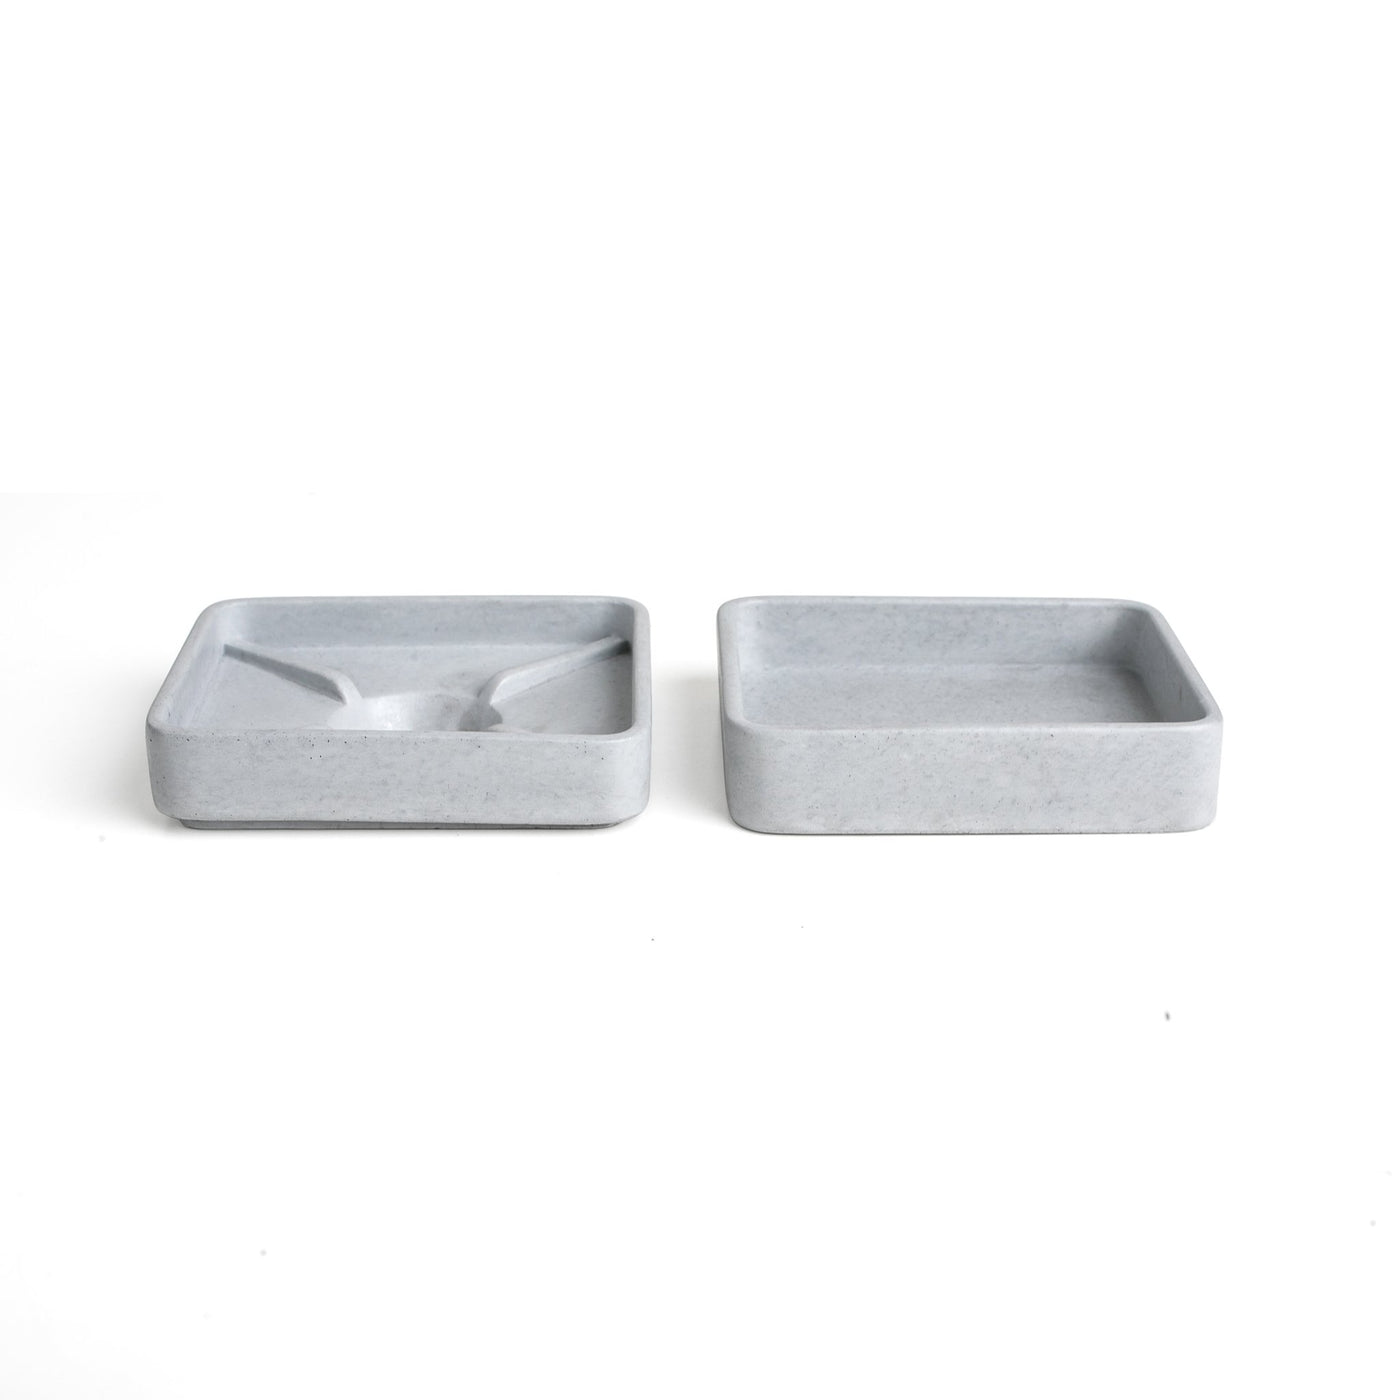 Light Grey Concrete Soap Stand w/ Vegan Soap-Storing and Organising-BOXES / ORGANISERS / CONTAINERS, CONCRETE, SOAP STANDS, STONE-Forest Homes-Nature inspired decor-Nature decor